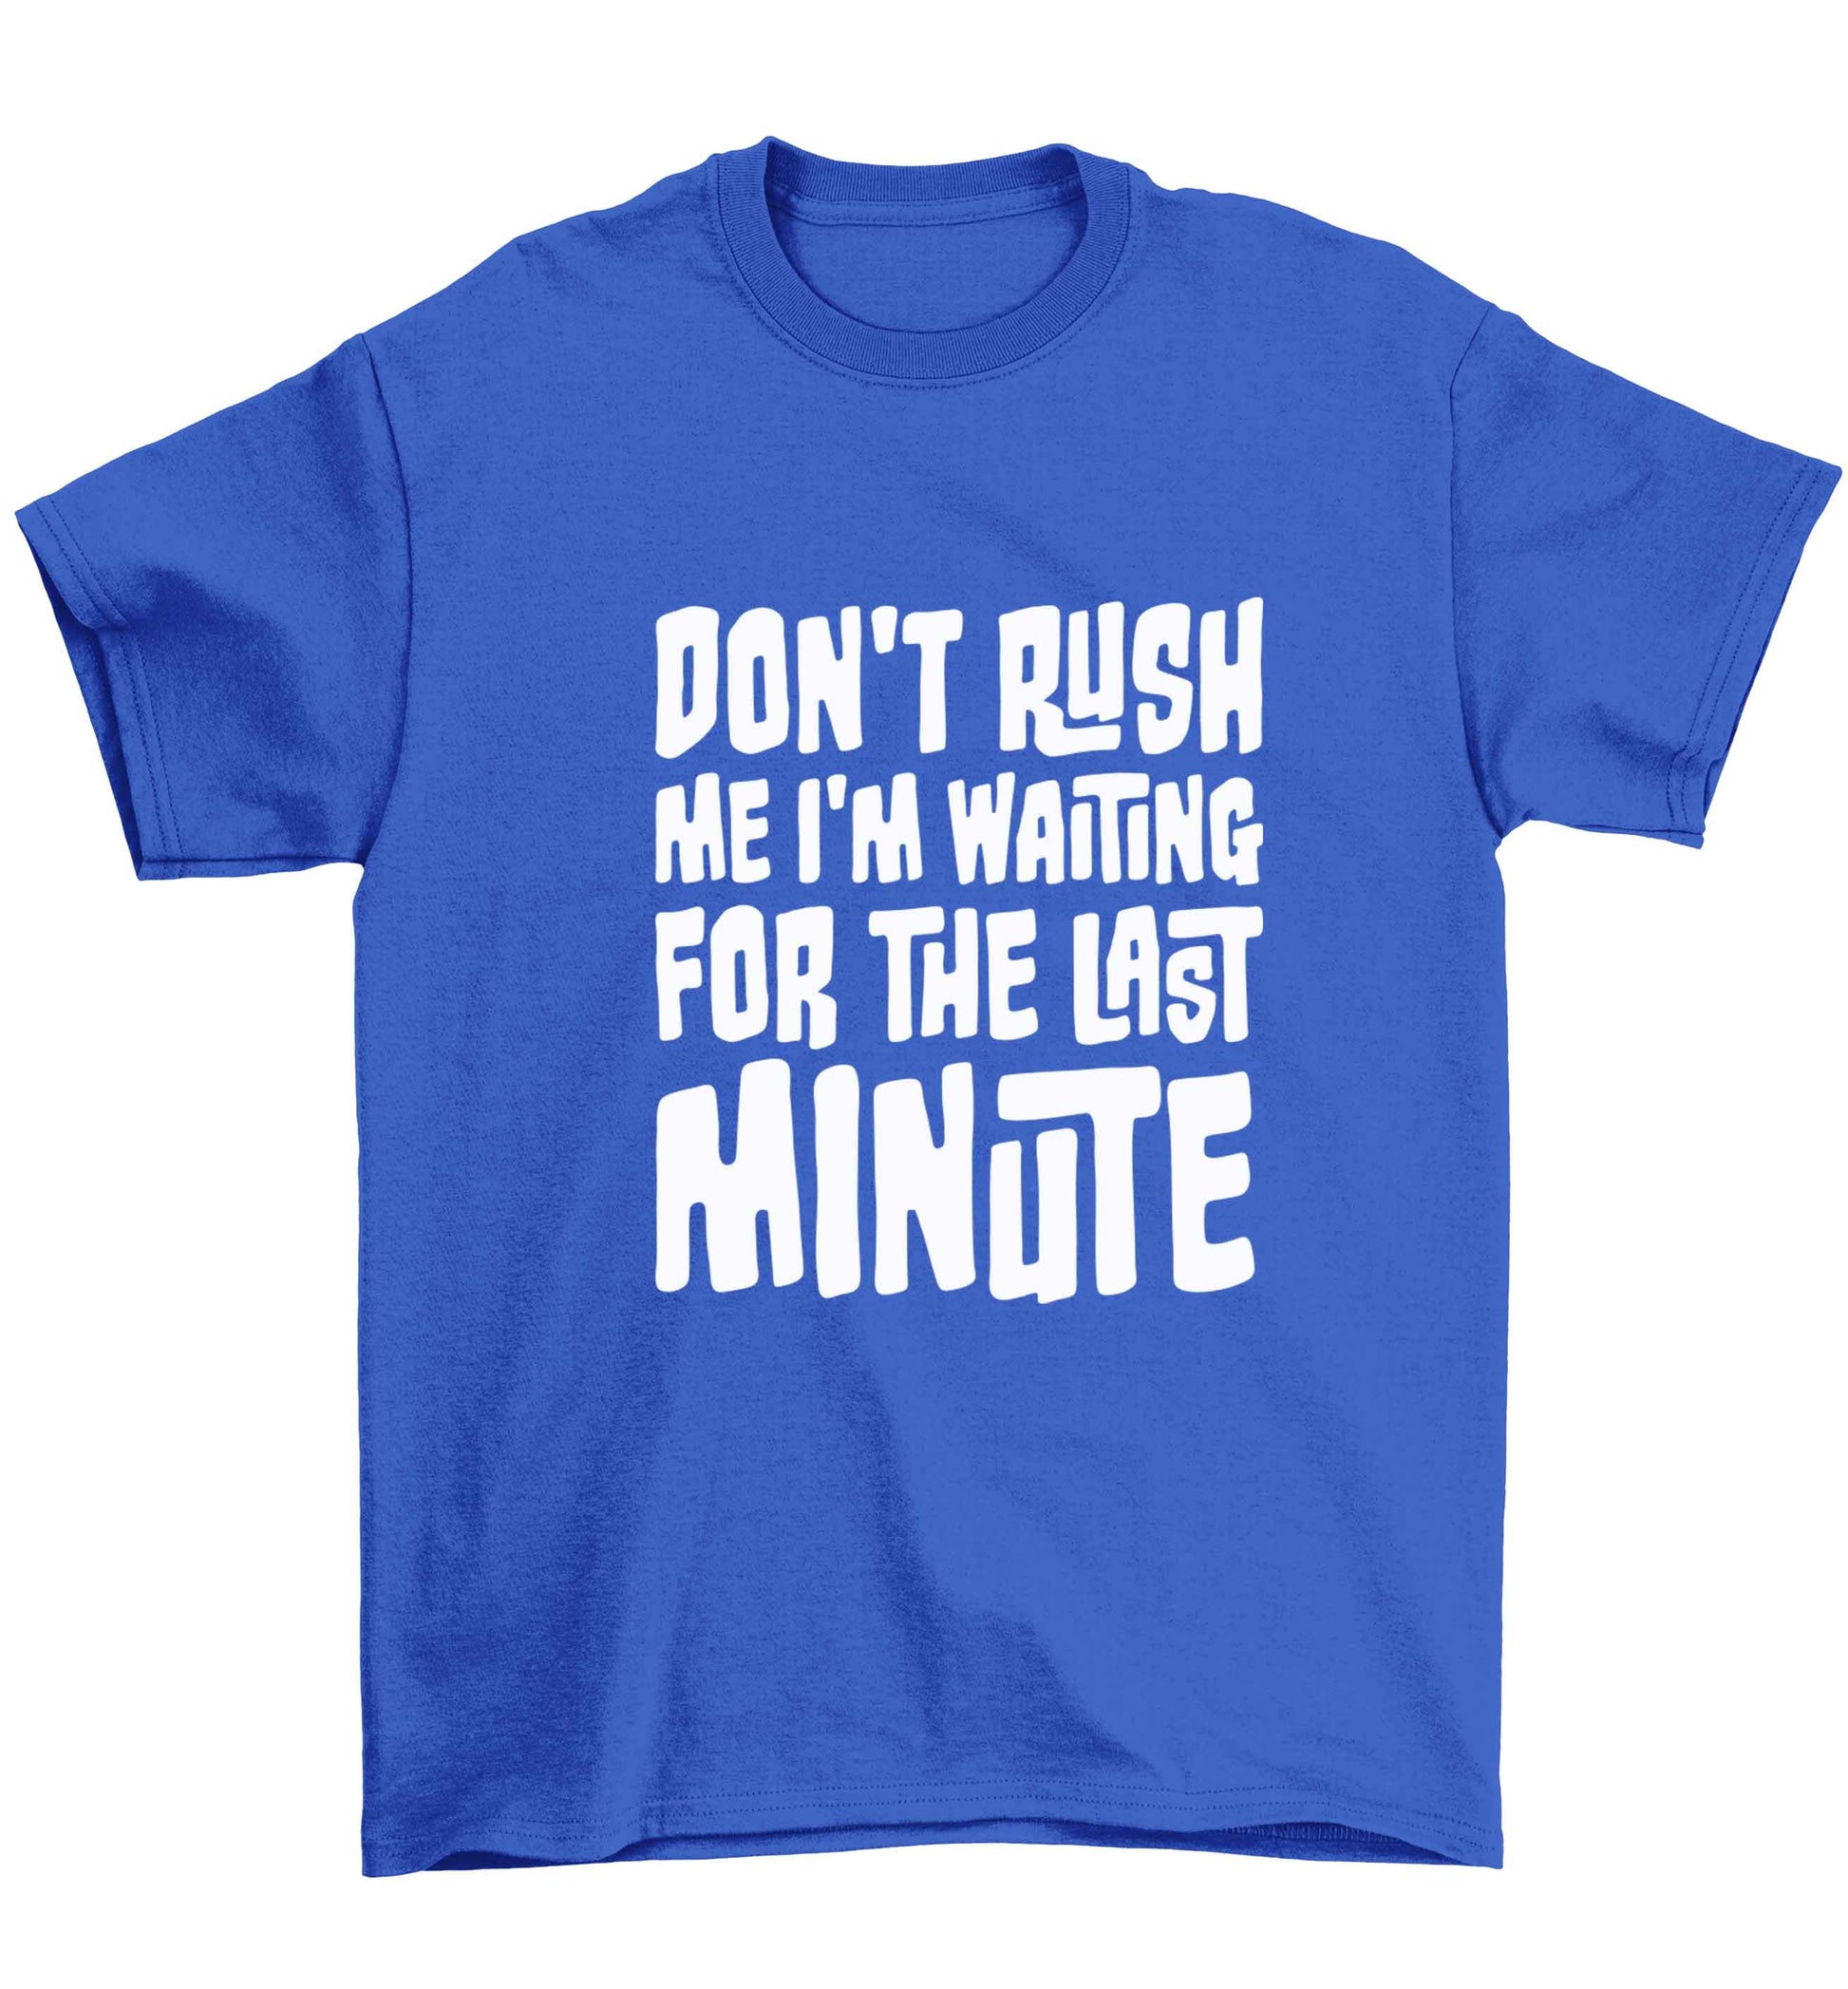 Don't rush me I'm waiting for the last minute Children's blue Tshirt 12-13 Years